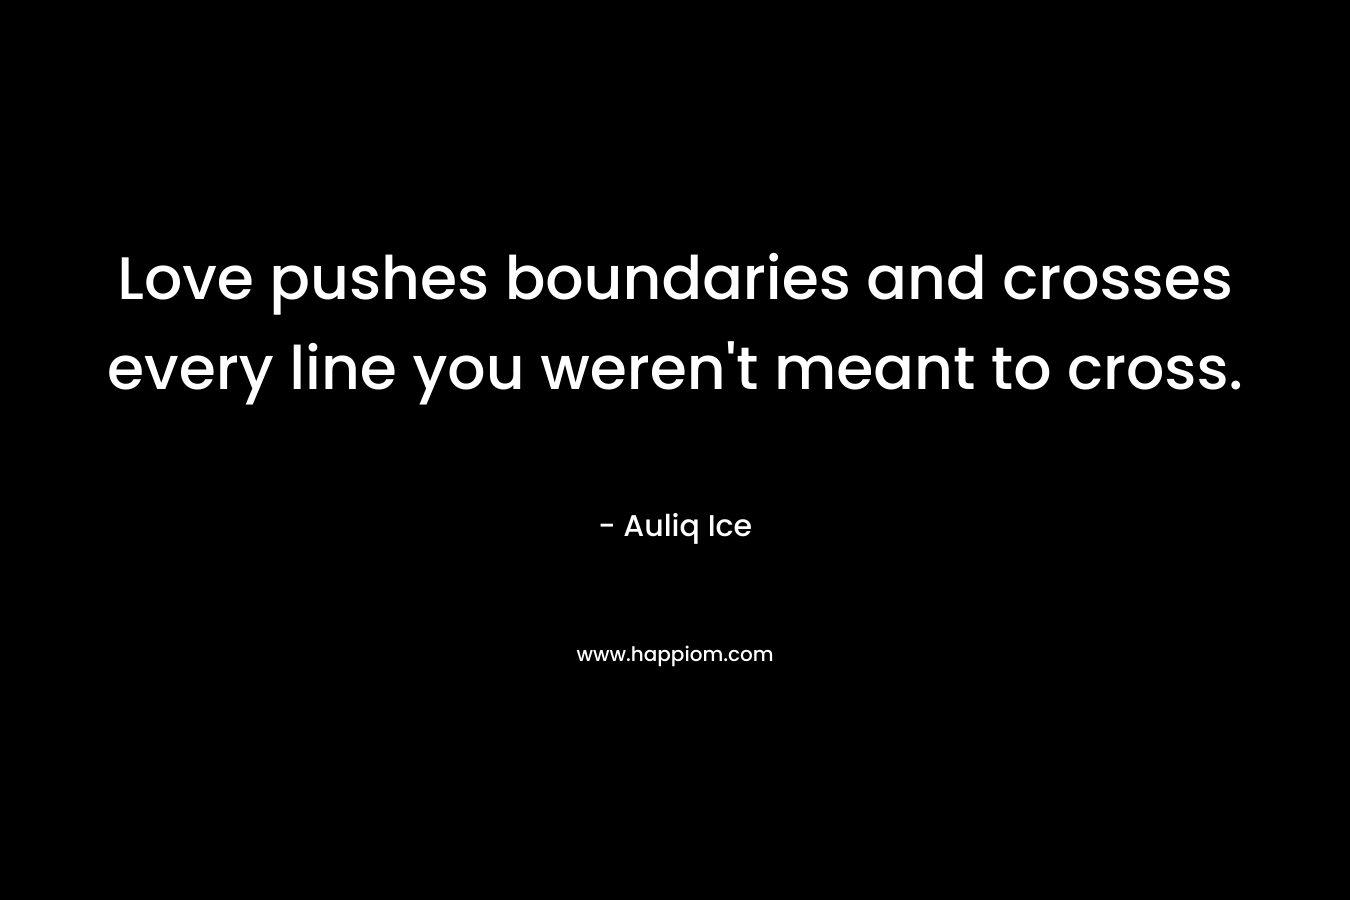 Love pushes boundaries and crosses every line you weren't meant to cross.